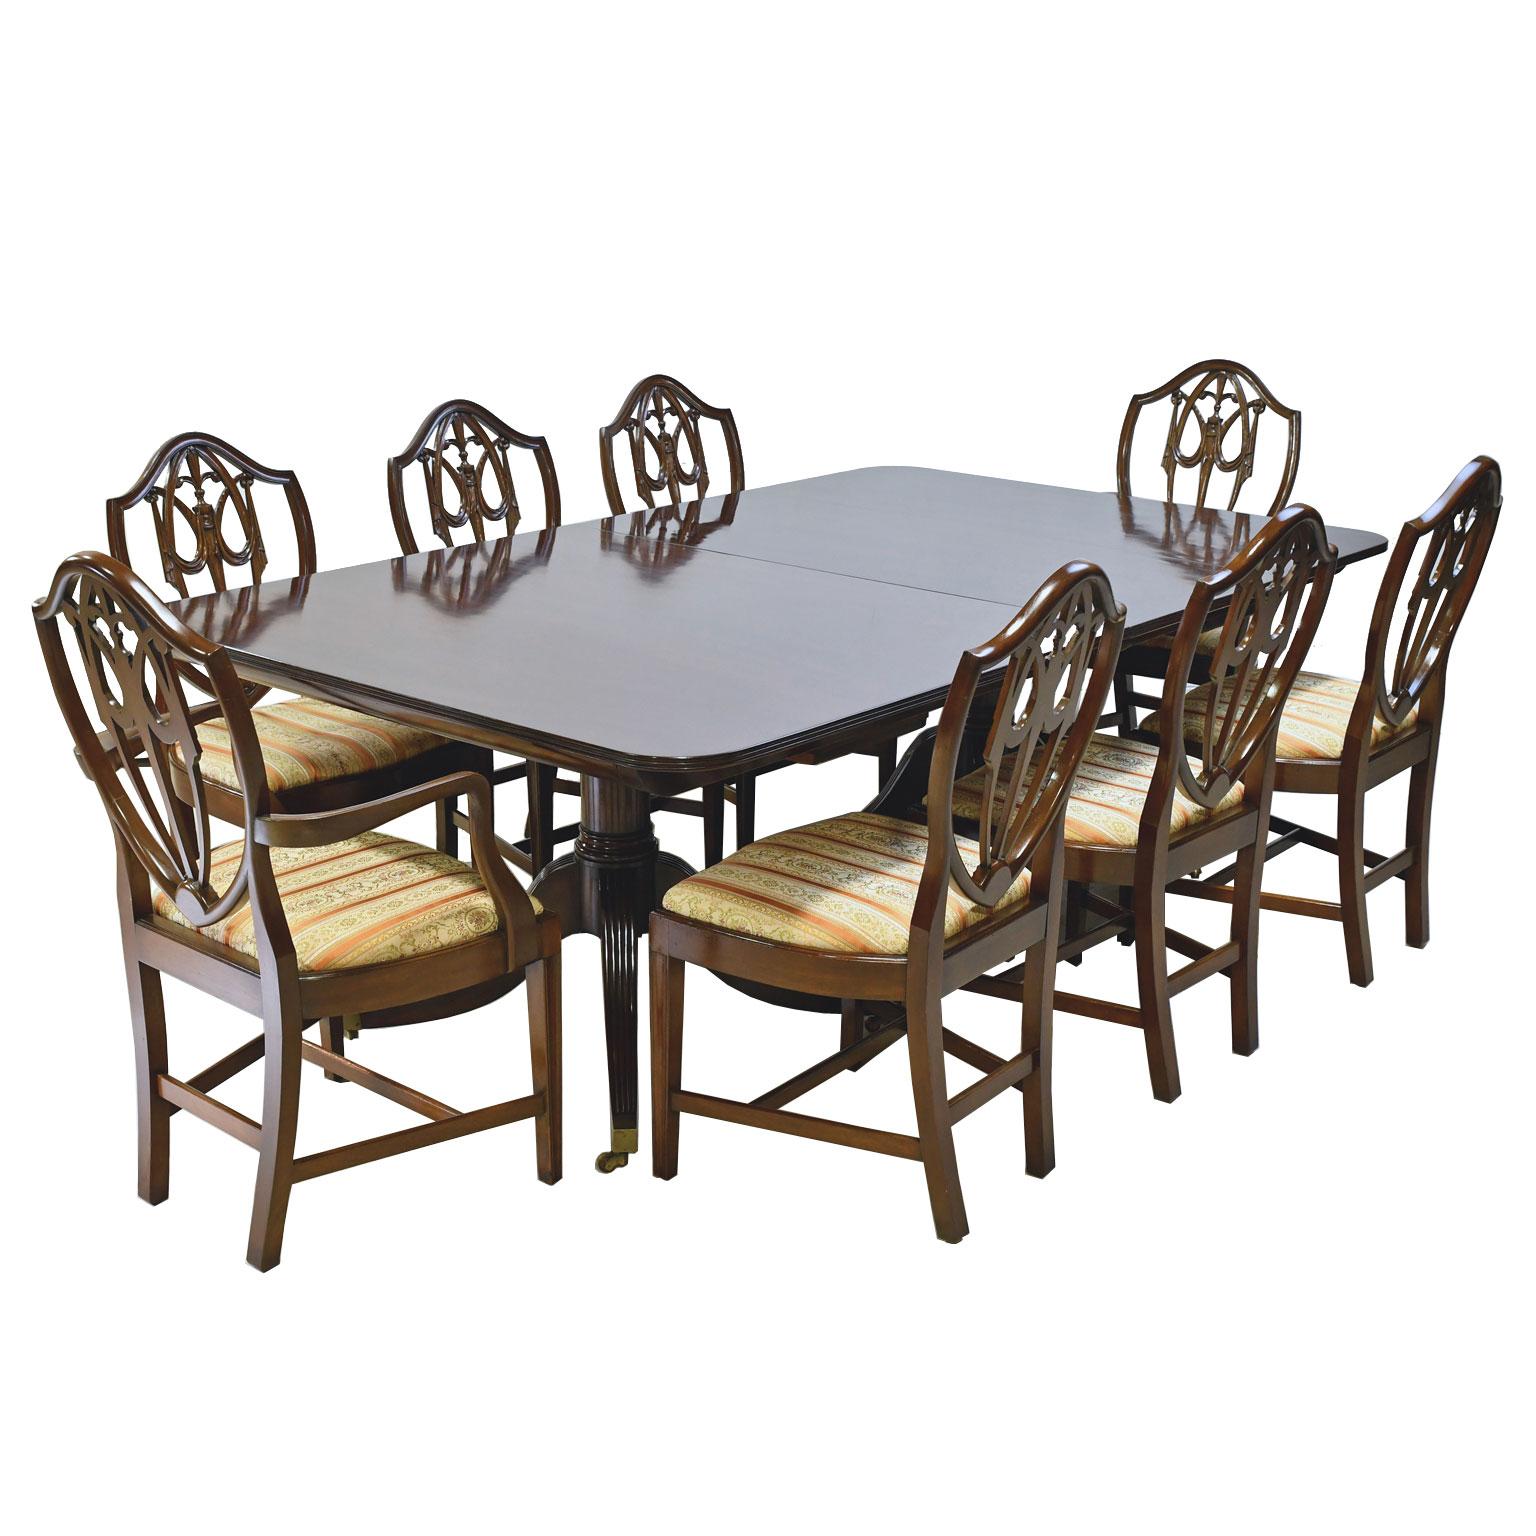  Hepplewhite-Style Dining Set in Mahogany, 12' Long Table and Set of 12 Chairs 5